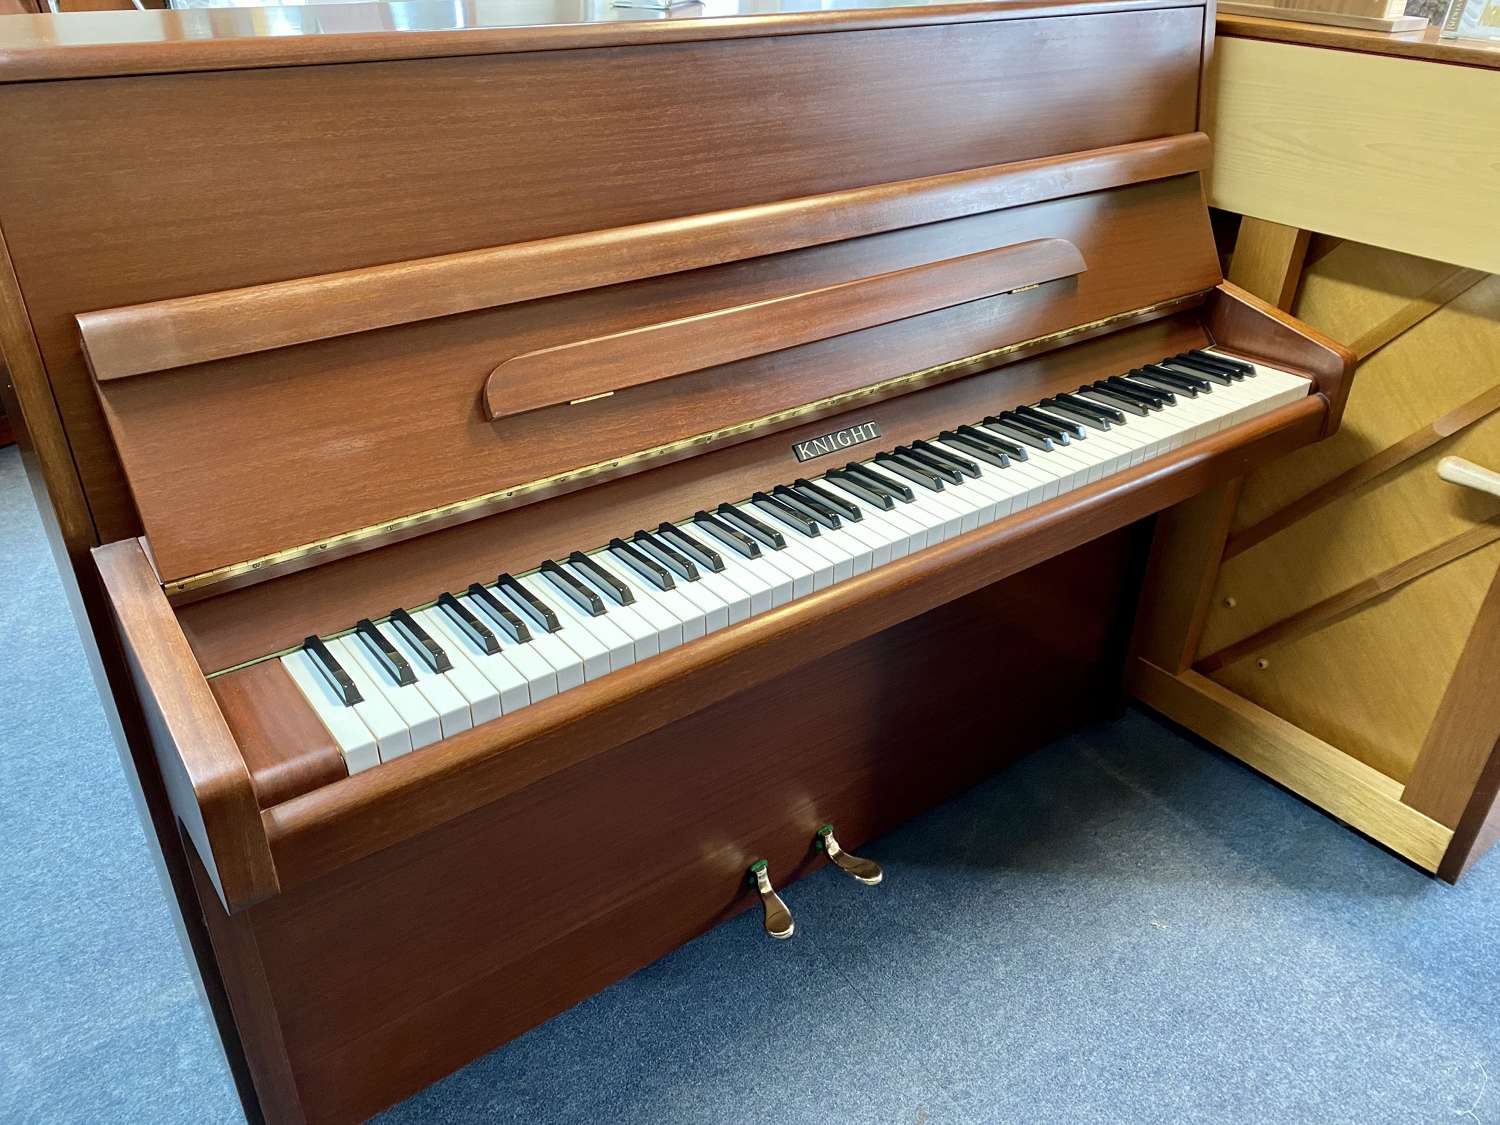 Knight K10 modern upright piano for sale